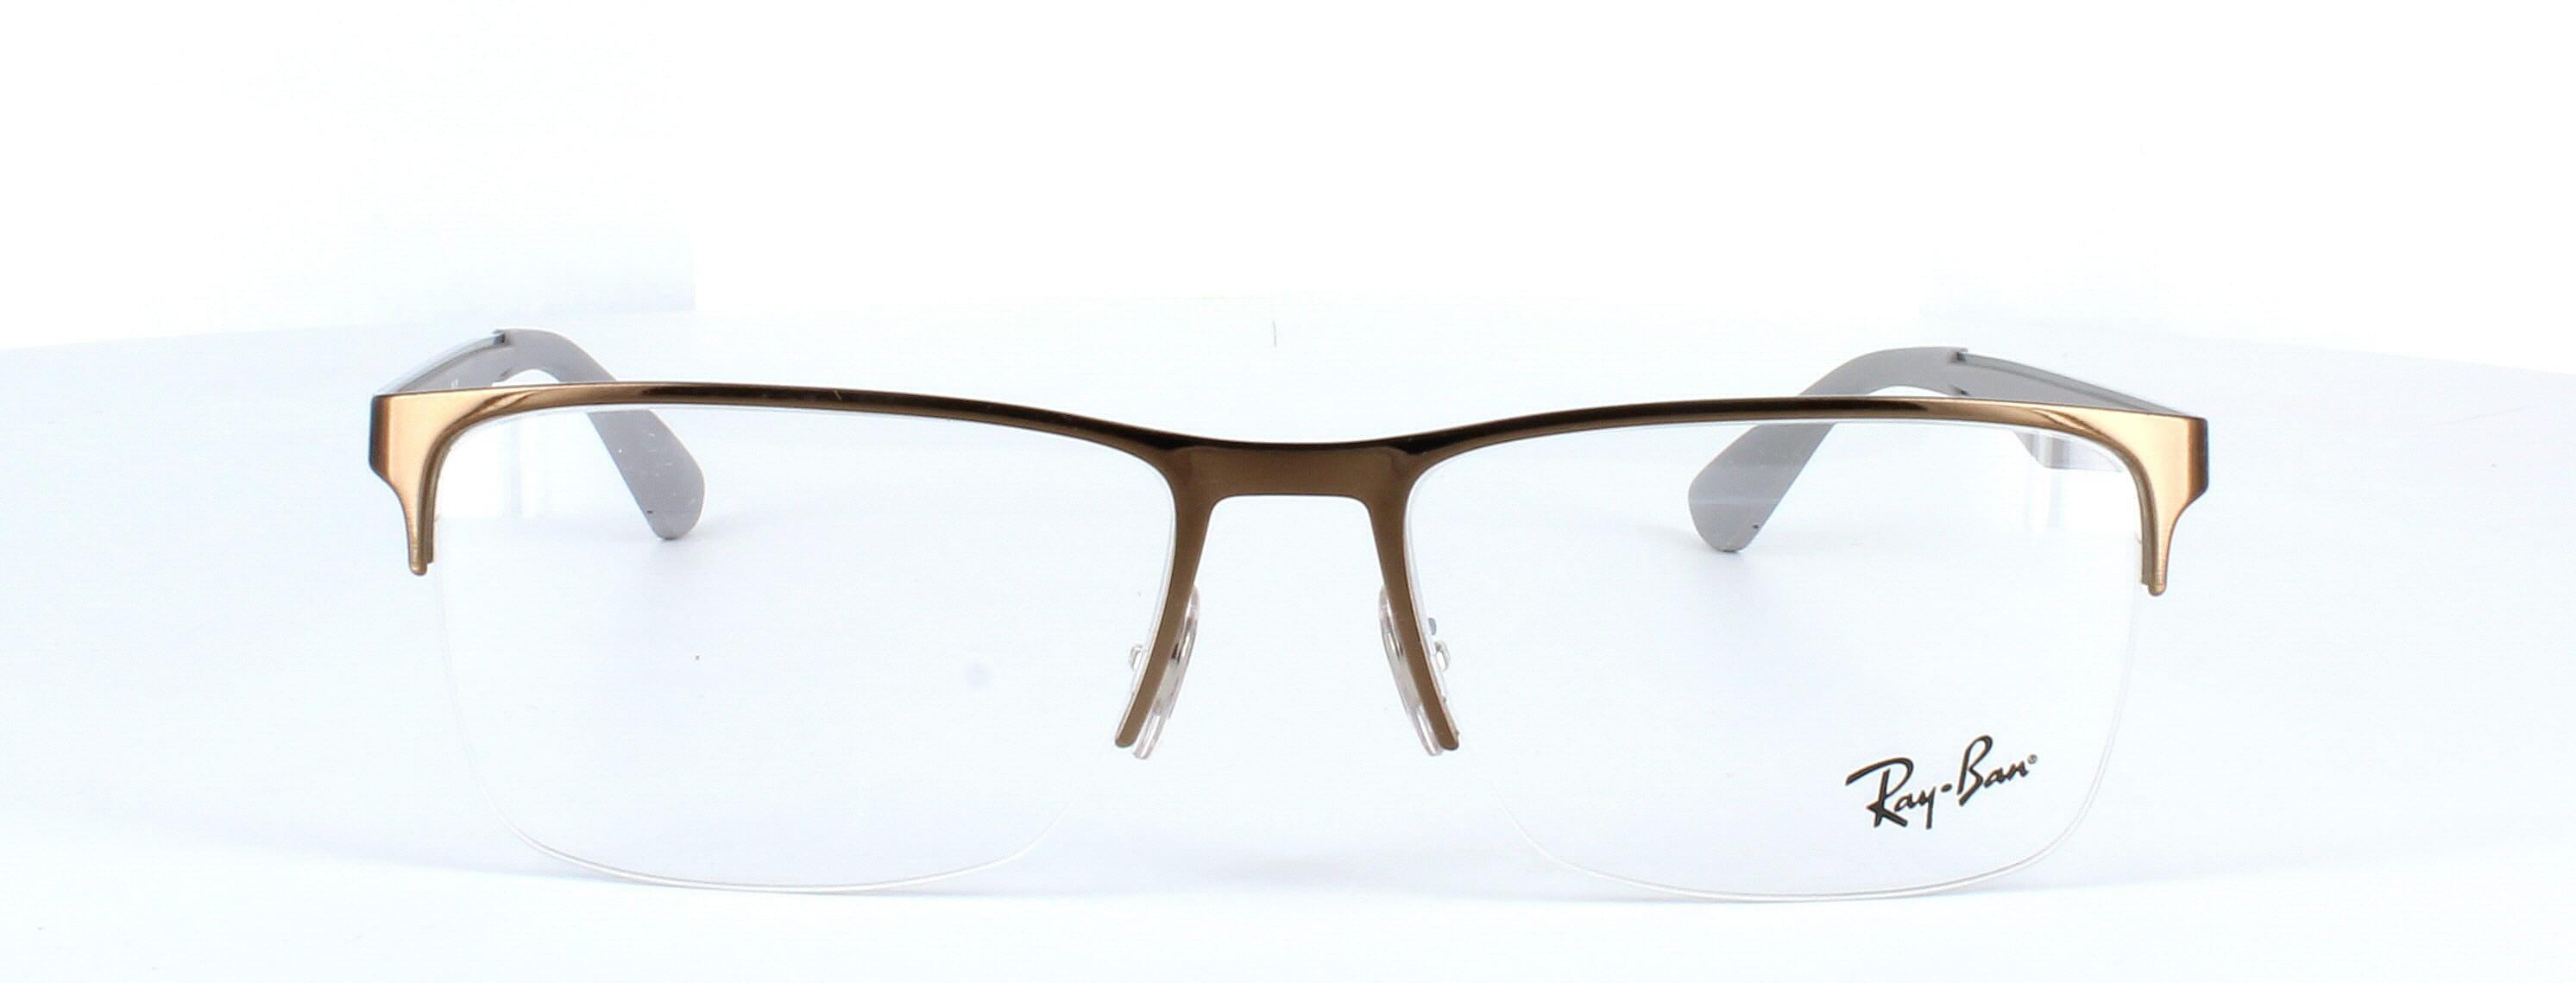 Gents semi-rimless glasses in bronze by Ray Ban - RB6335 - image 2